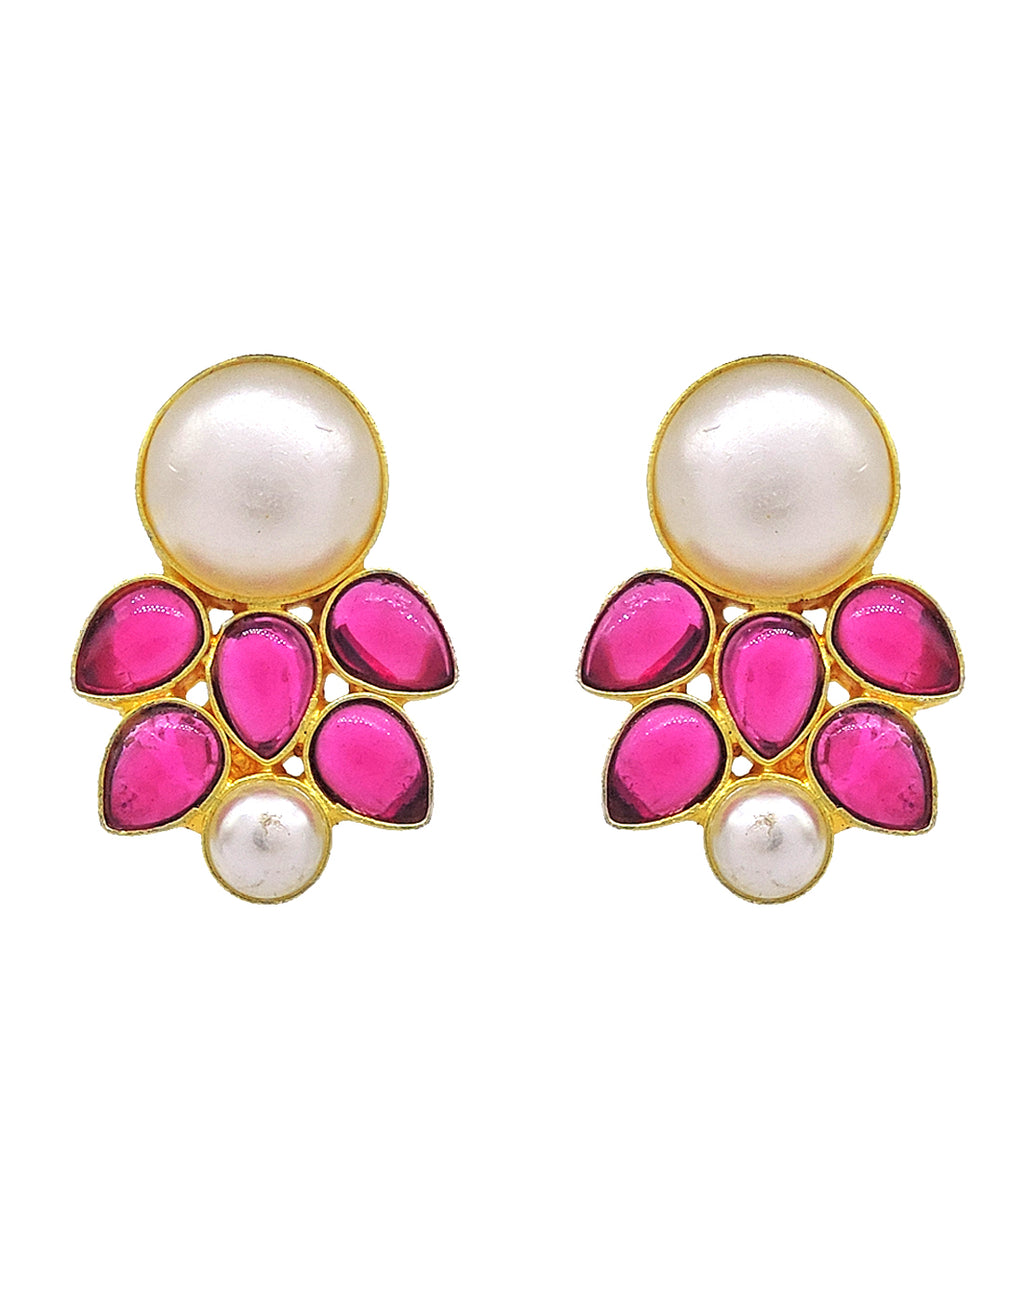 Pink Crystal & Pearl Earrings - Statement Earrings - Gold-Plated & Hypoallergenic Jewellery - Made in India - Dubai Jewellery - Dori